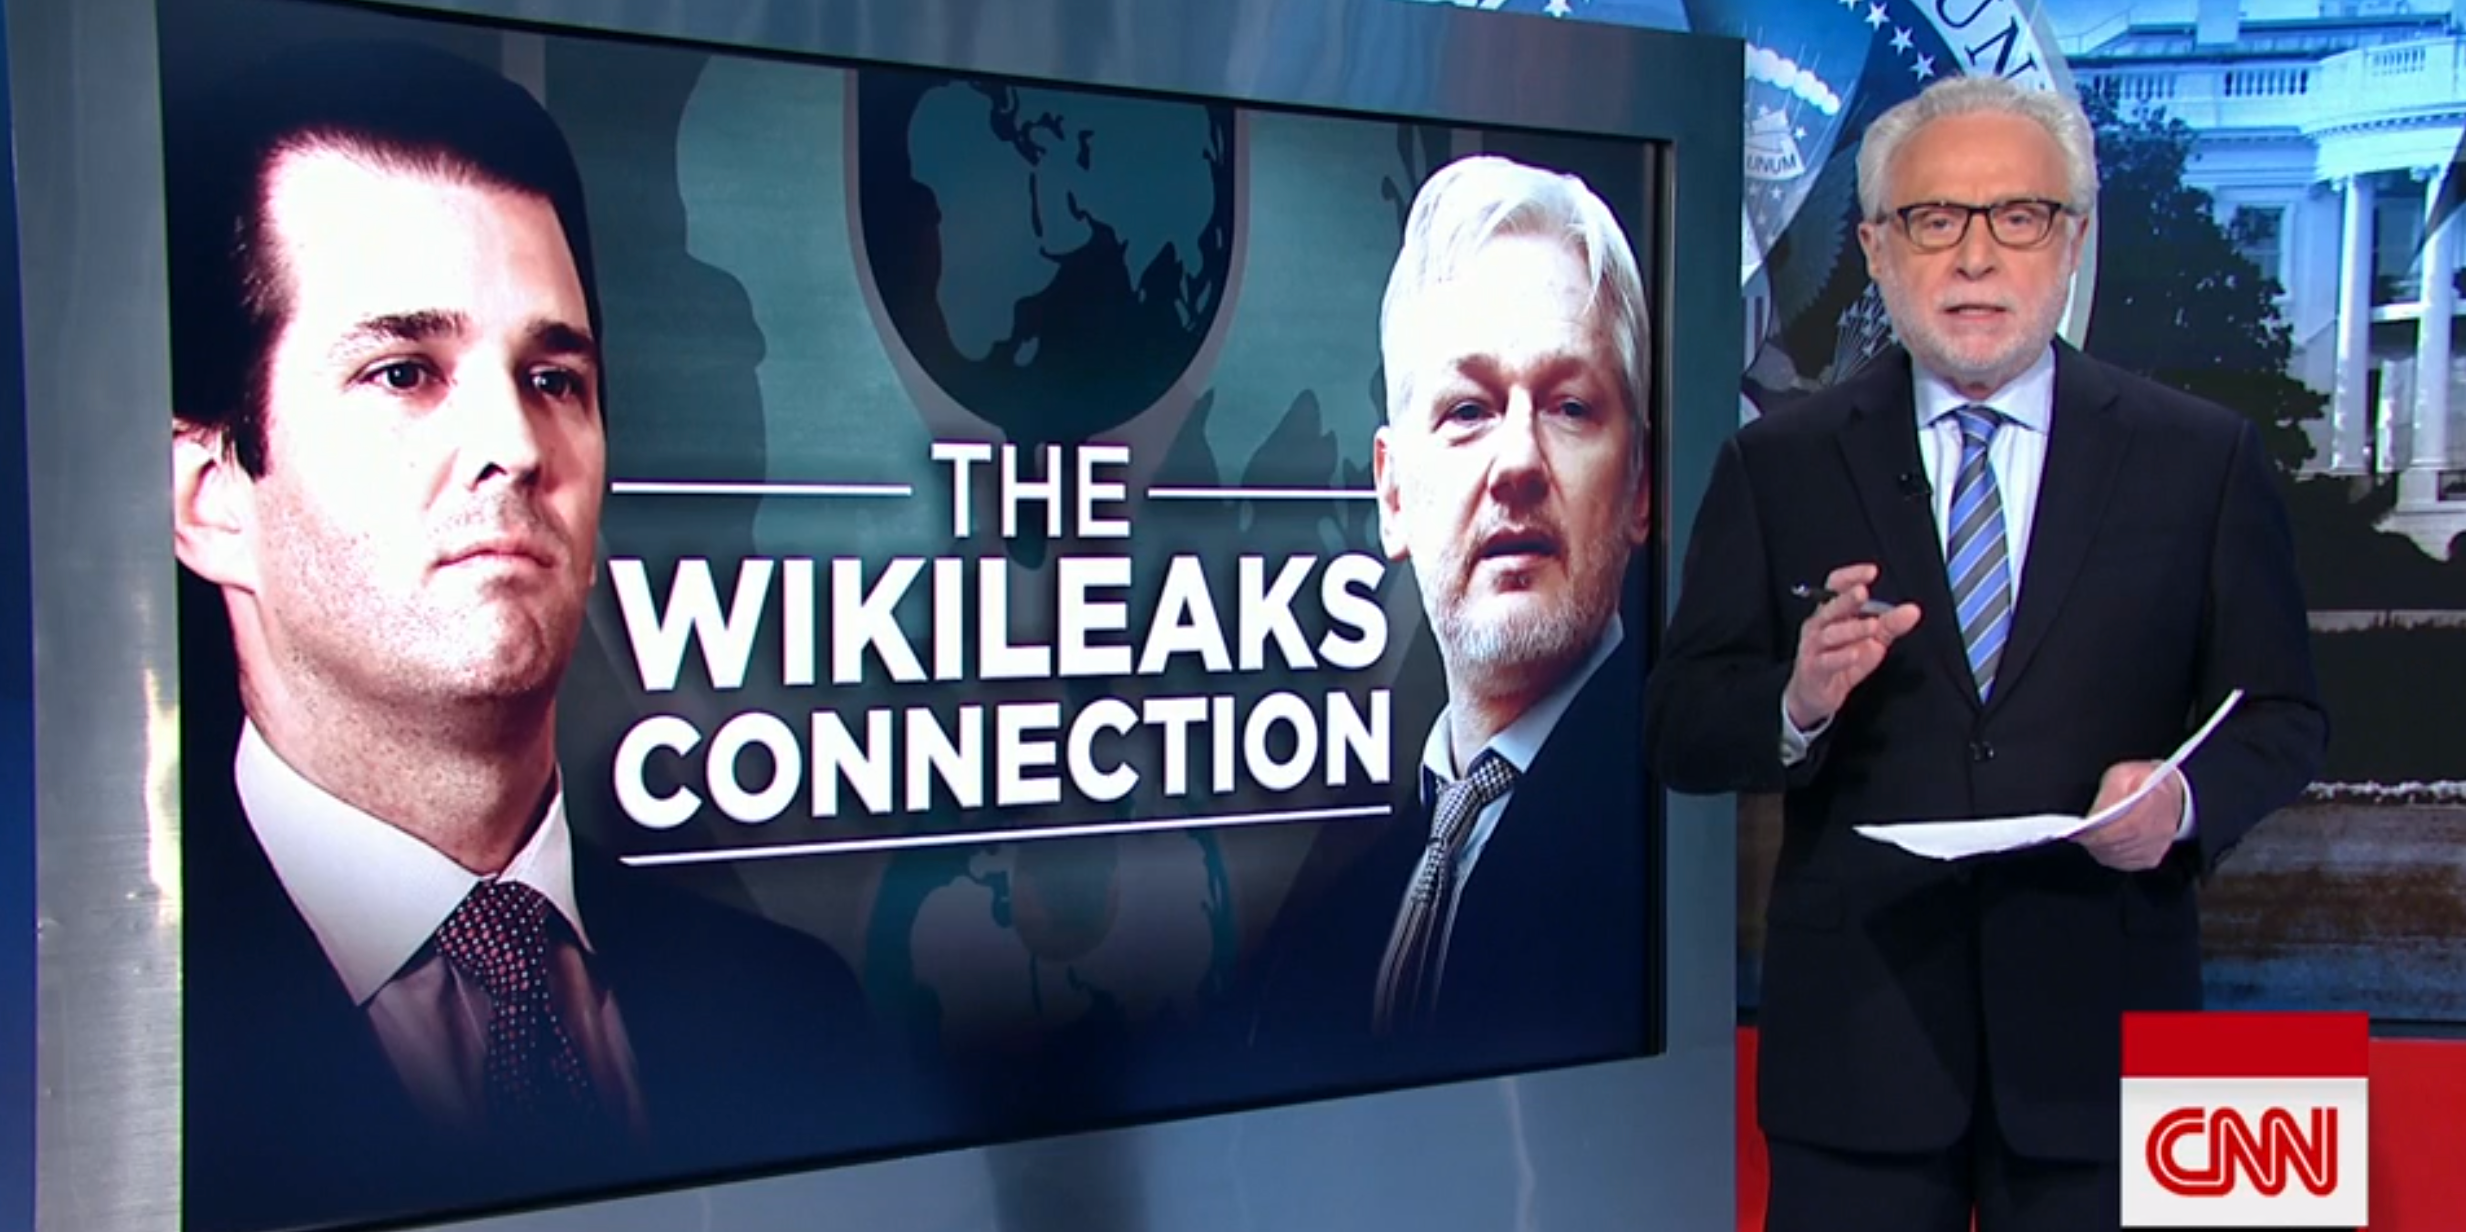 CNN Busted Reporting Fake News on WikiLeaks Email - The Rush Limbaugh Show2466 x 1232